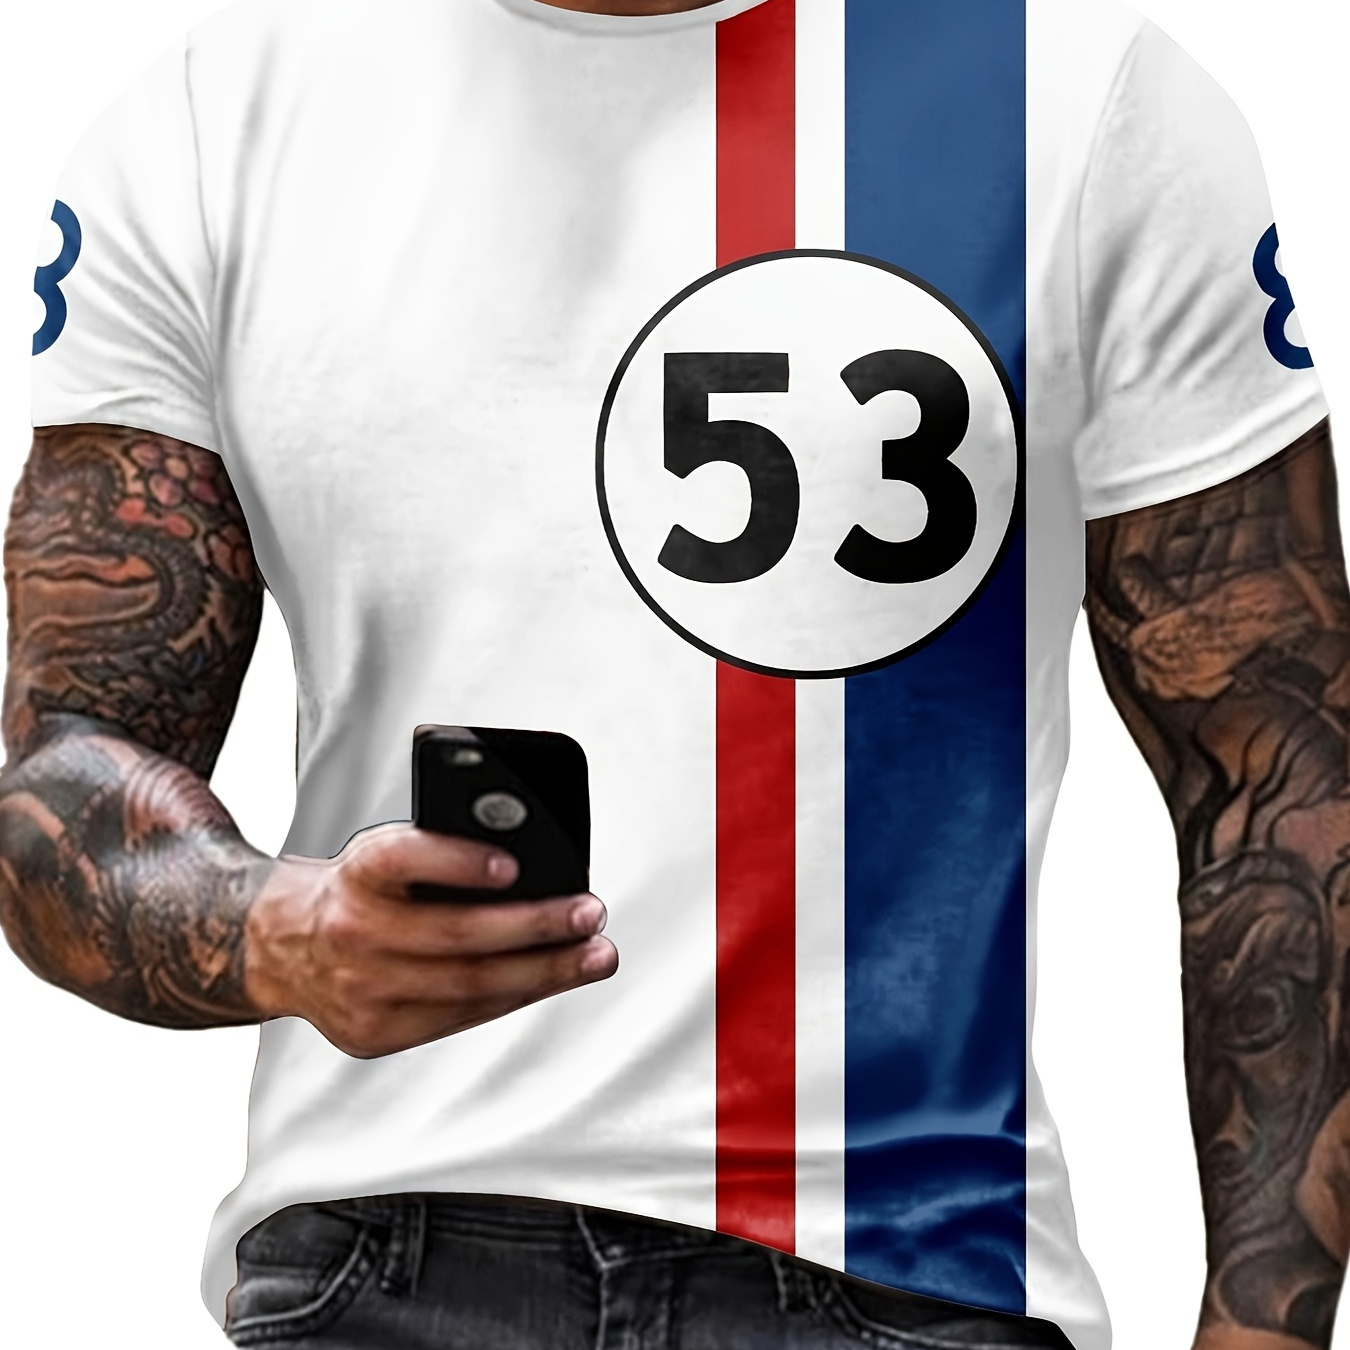 

Men's #53 Print And Color Block Striped T-shirt, Crew Neck And Short Sleeve Tee, Classic And Chic Tops For Summer Outdoors Leisurewear